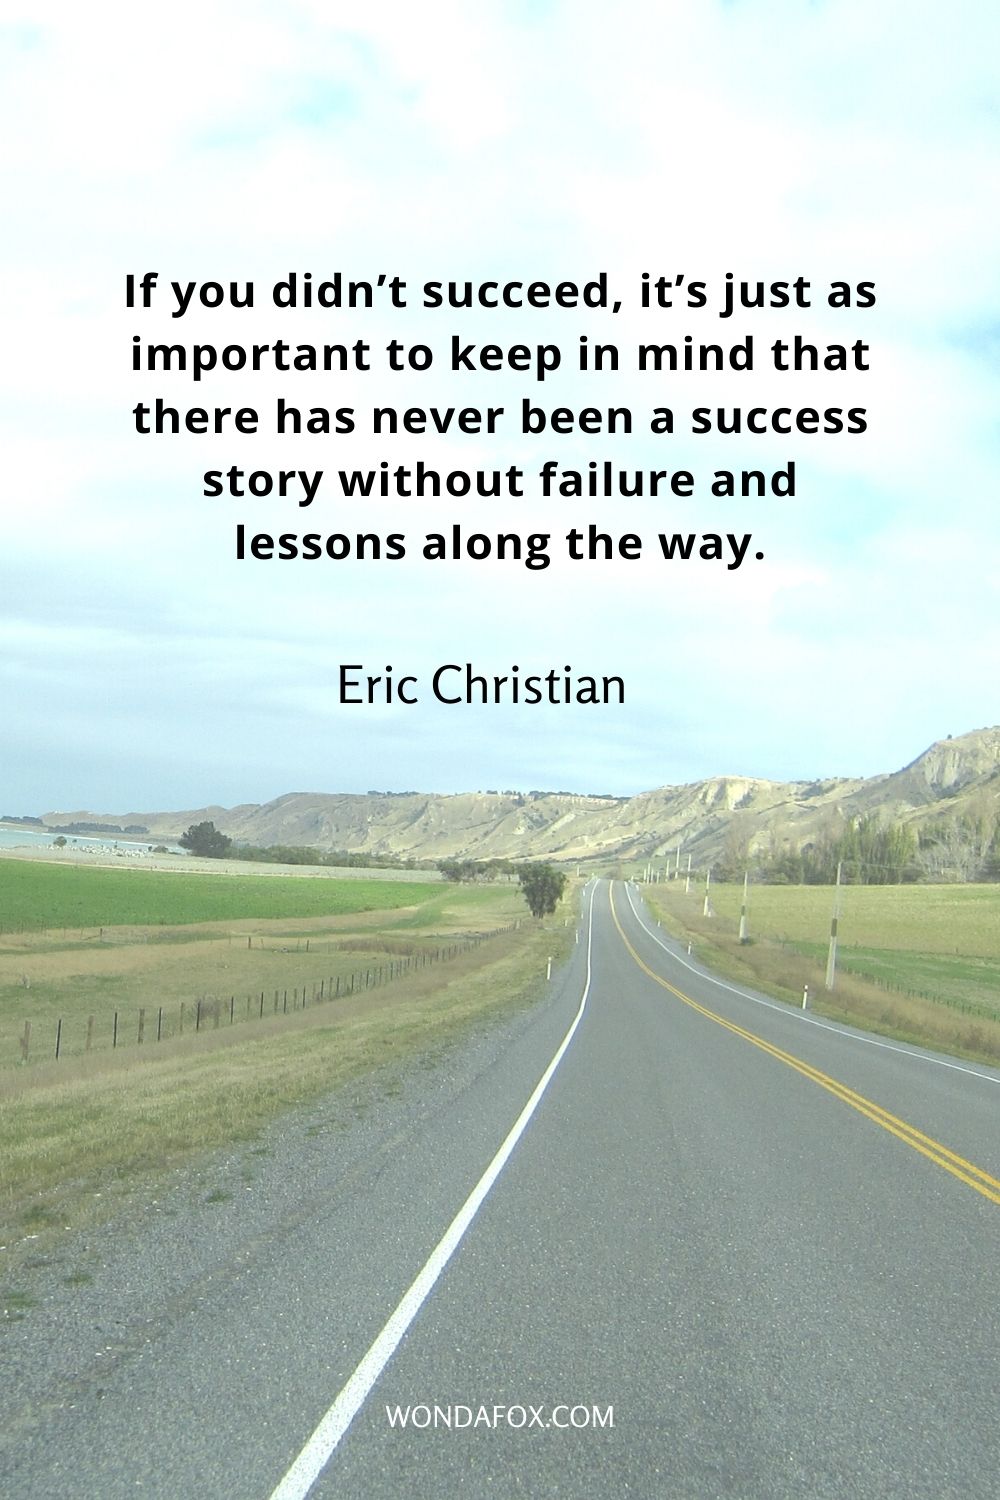 If you didn’t succeed, it’s just as important to keep in mind that there has never been a success story without failure and lessons along the way.